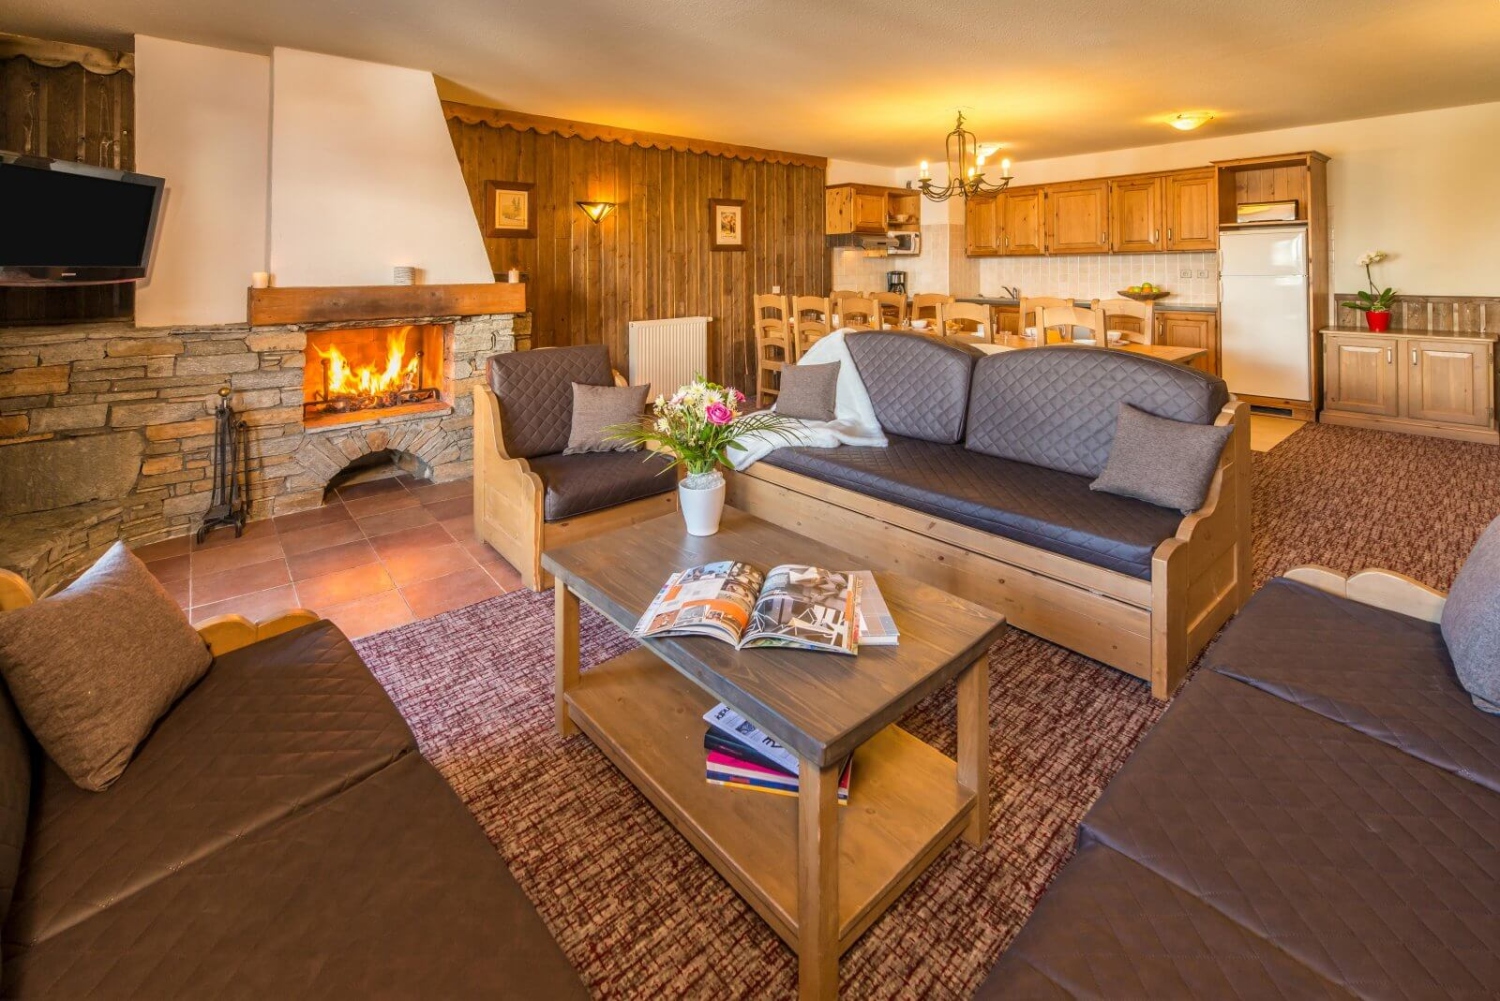 Living room and kitchen with open fire - Chalet Altitude Apartments - Les Arcs, France